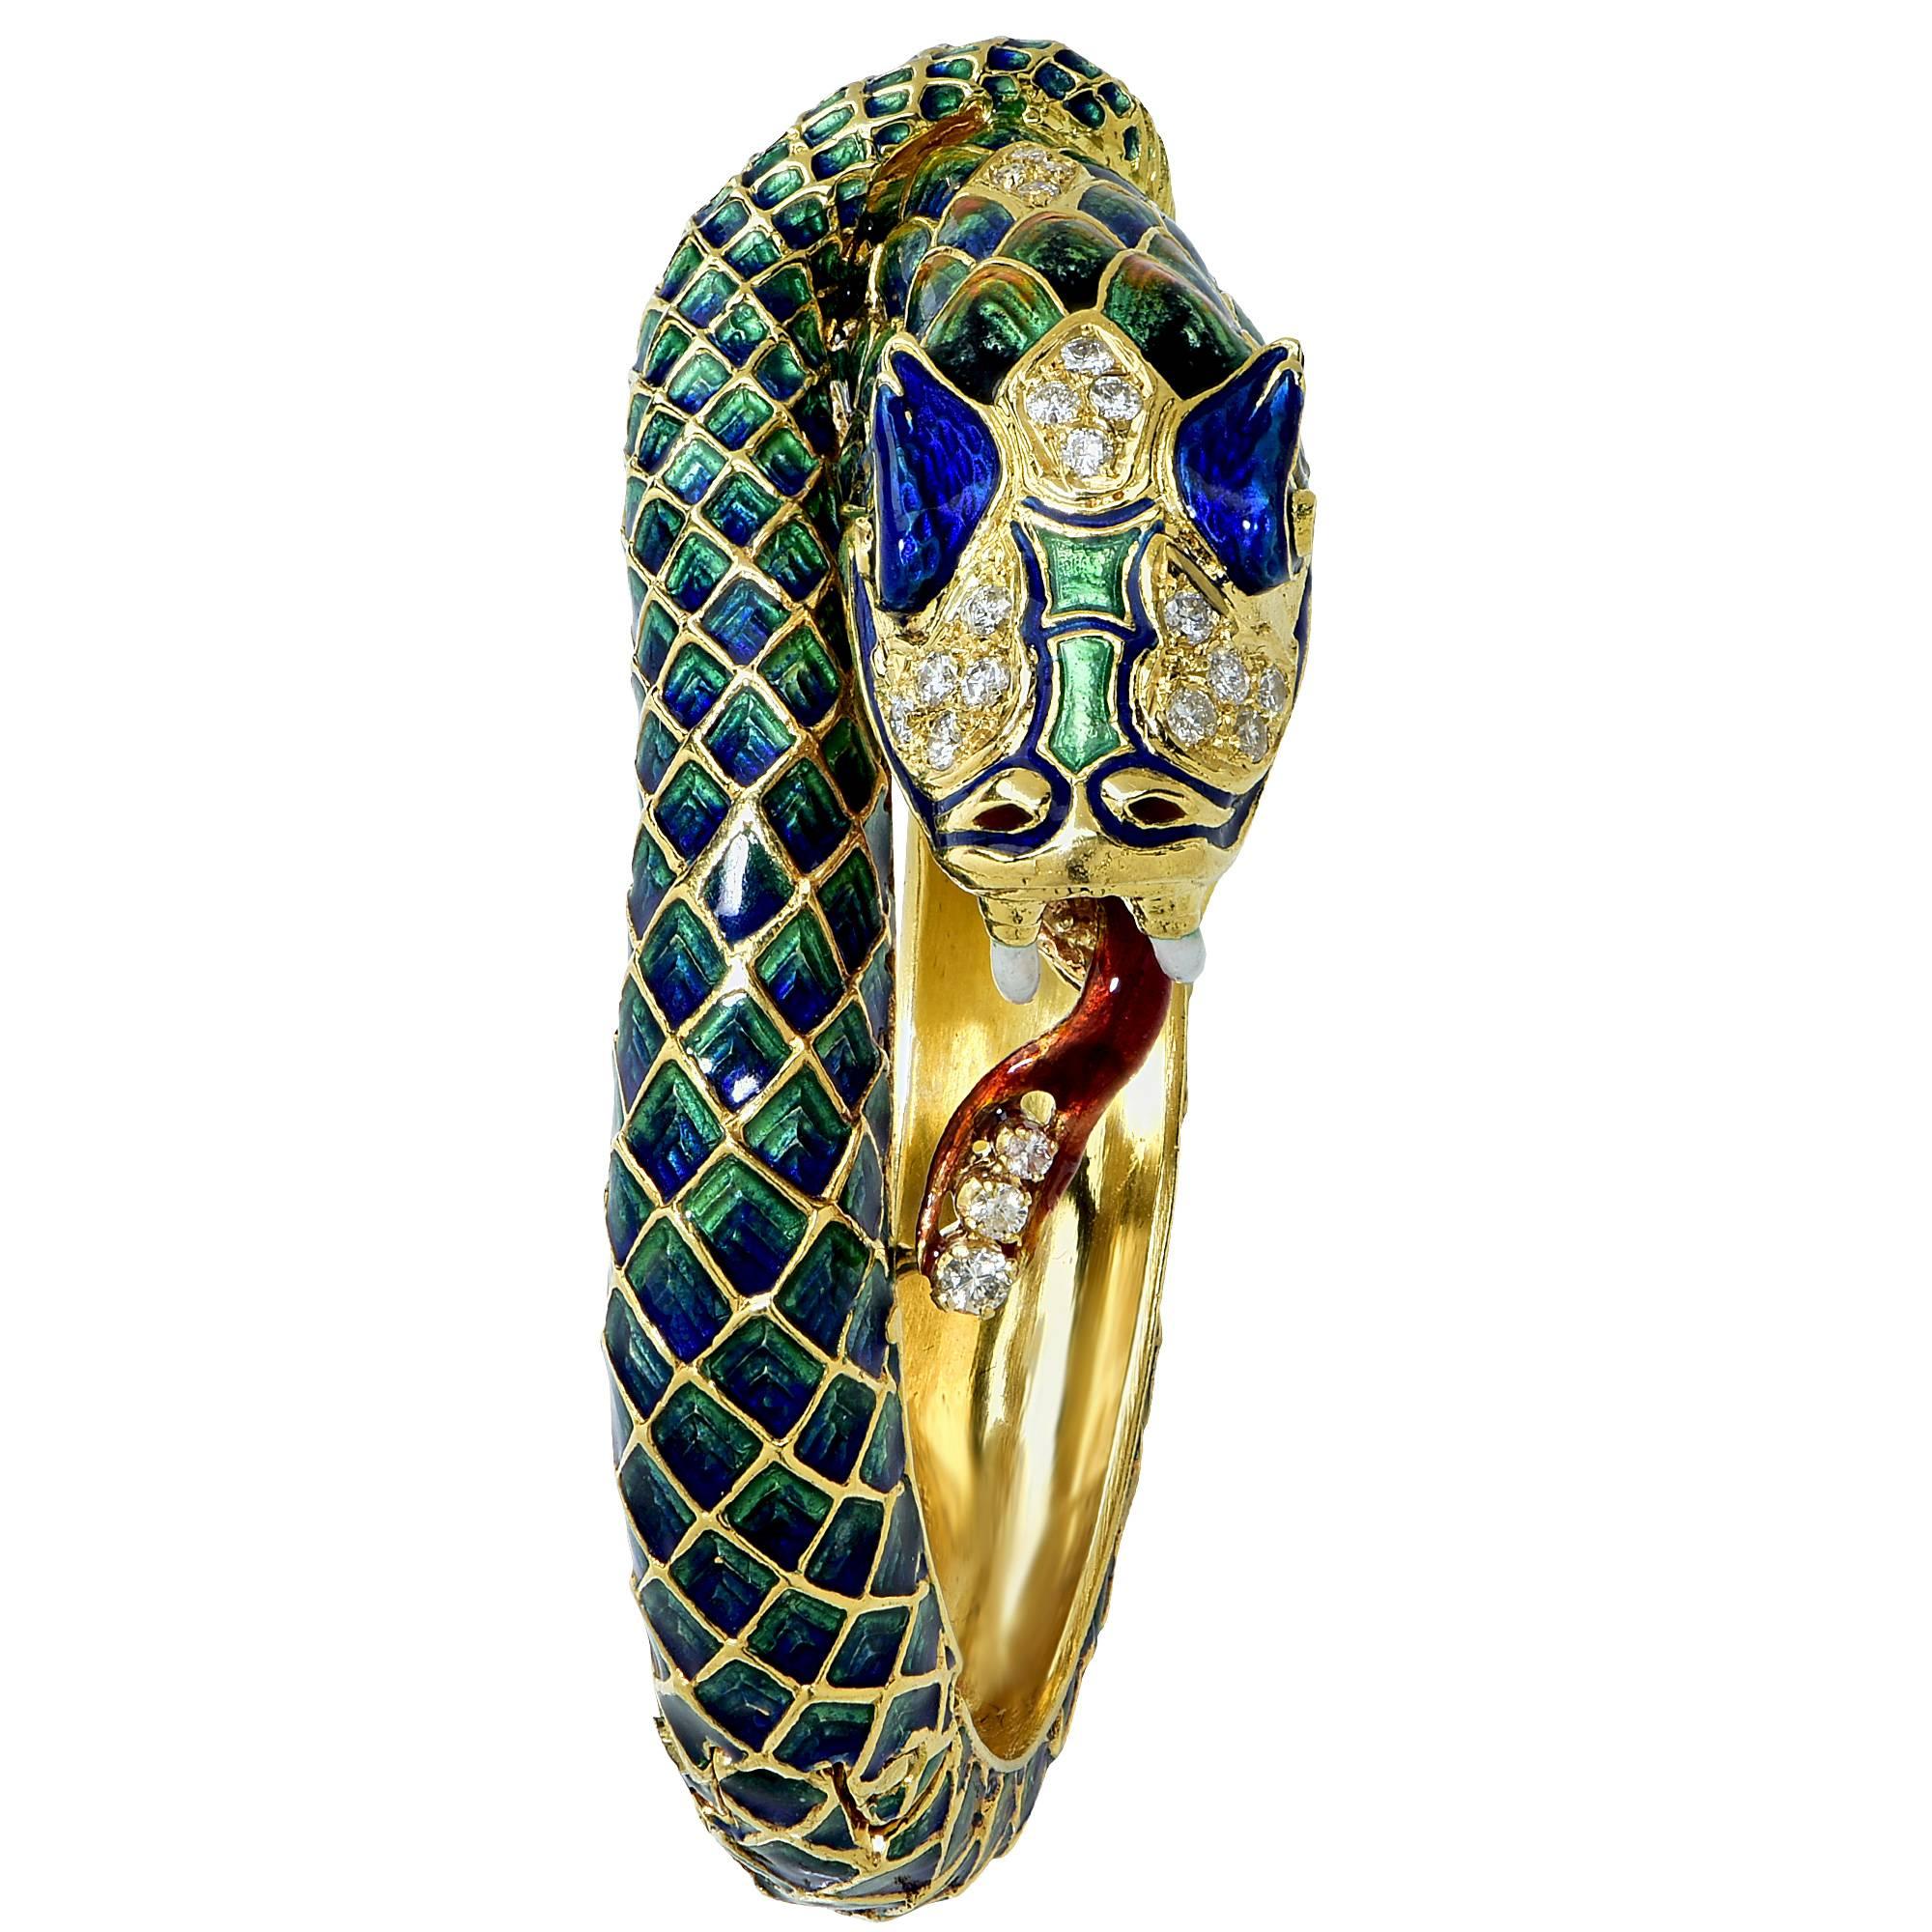 18k yellow gold snake bangle. This gorgeous snake bangle is accented with blue and green enamel and contains 21 mixed cut diamonds weighing approximately .75cts.

It is stamped and tested as 18k gold.
The metal weight is 90 grams.

This diamond and